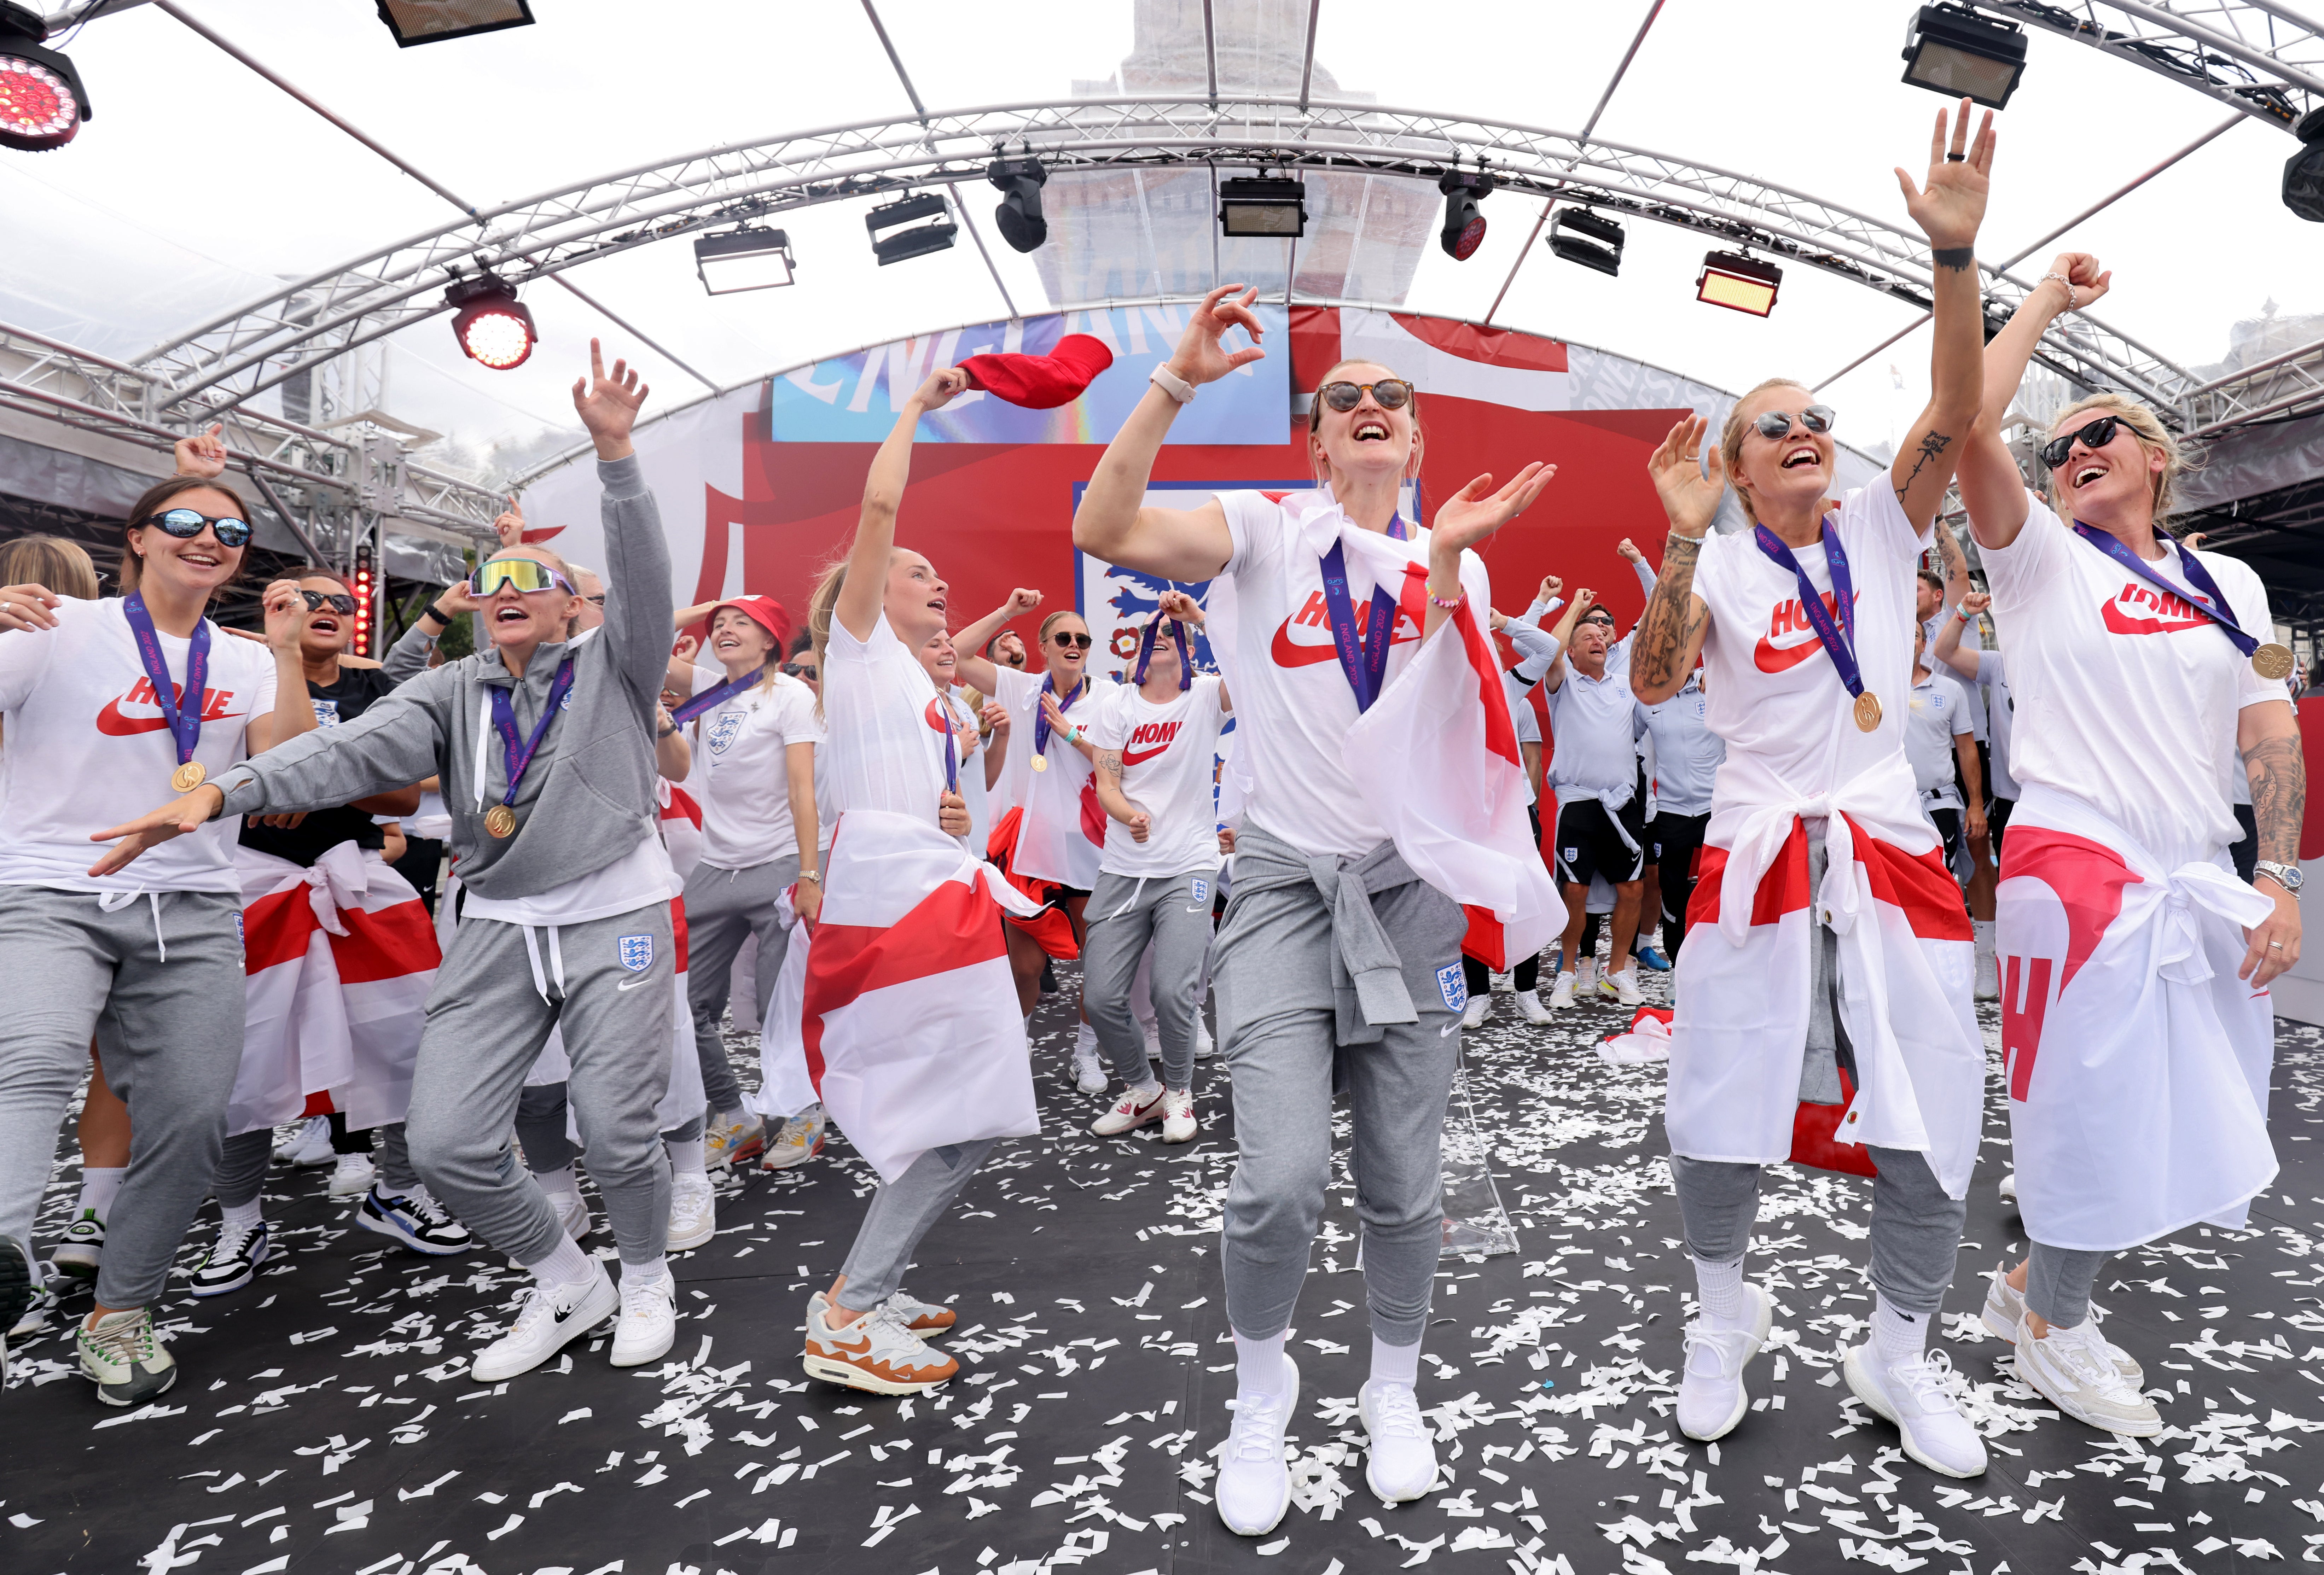 England players sing Sweet Caroline on stage during a fan celebration to commemorate England’s historic Uefa Women’s Euro 2022 triumph in Trafalgar Square, London (James Manning/PA)